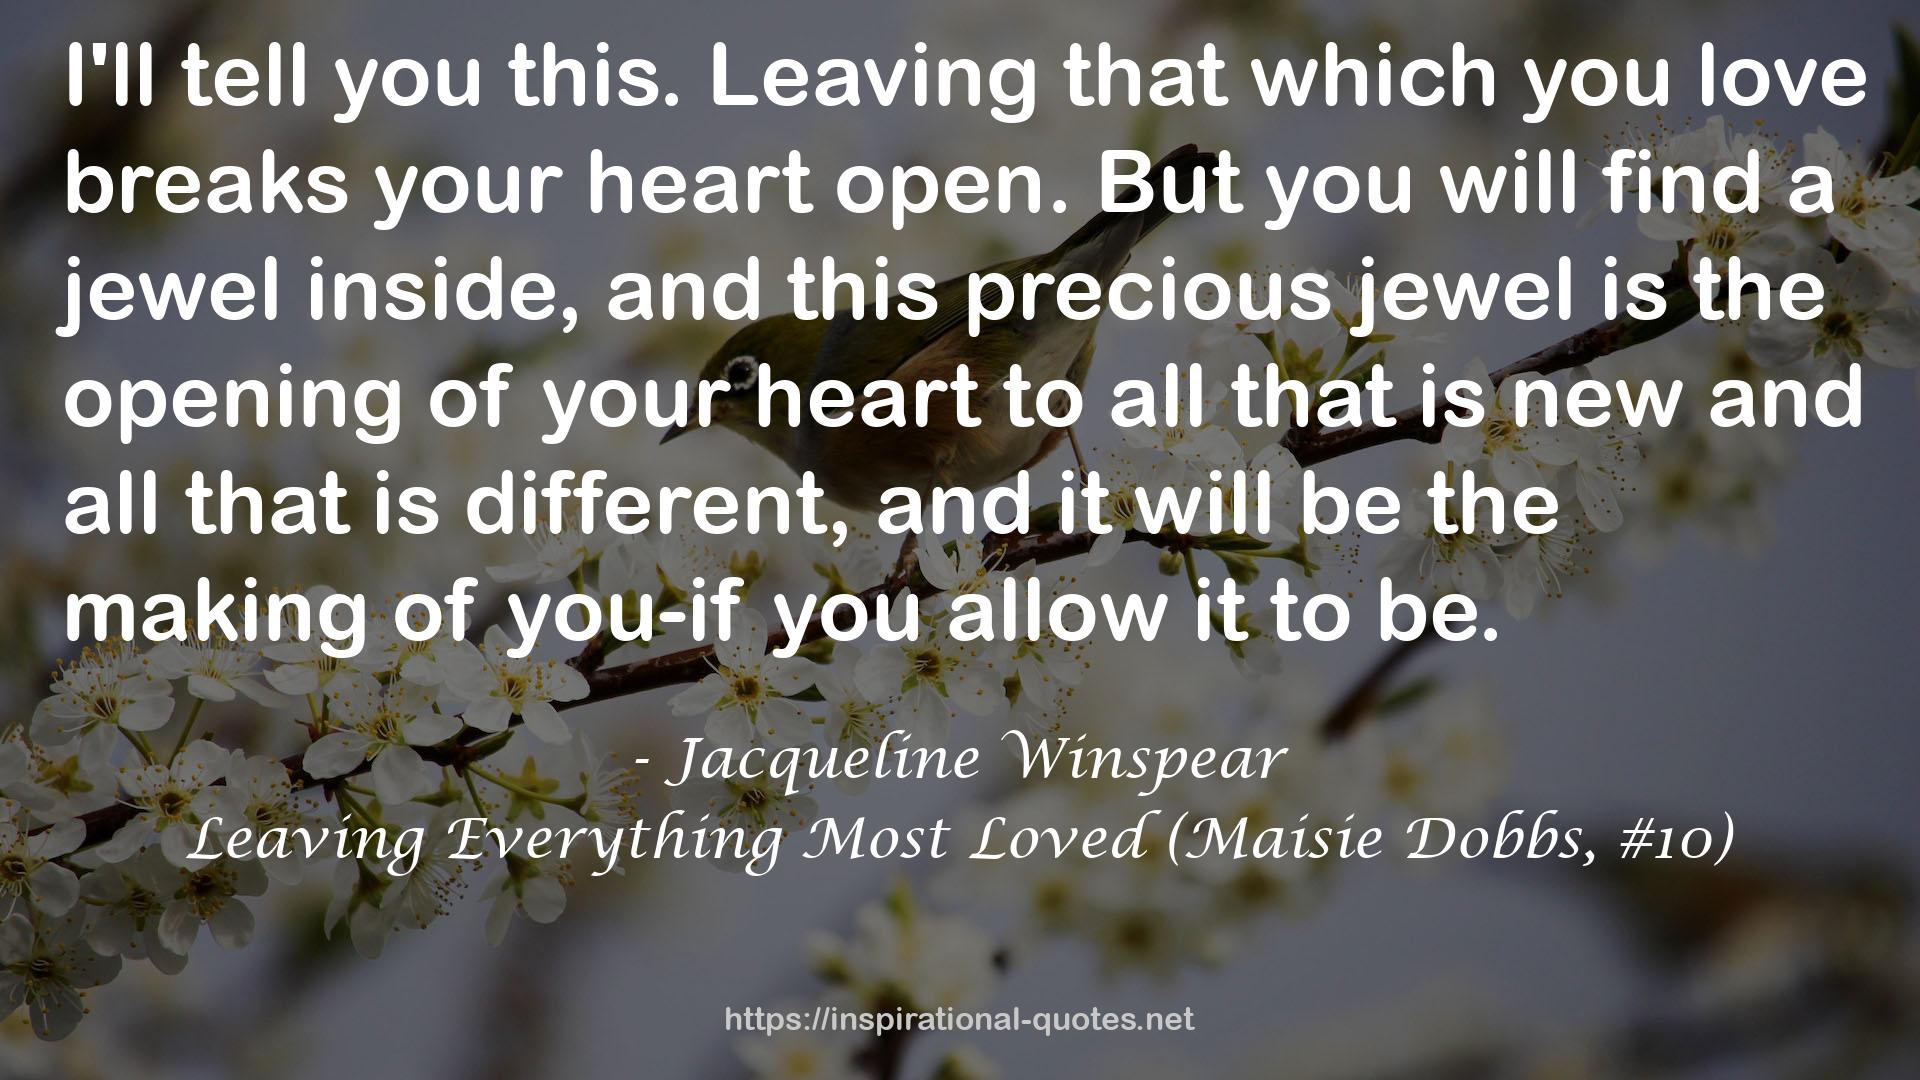 Leaving Everything Most Loved (Maisie Dobbs, #10) QUOTES